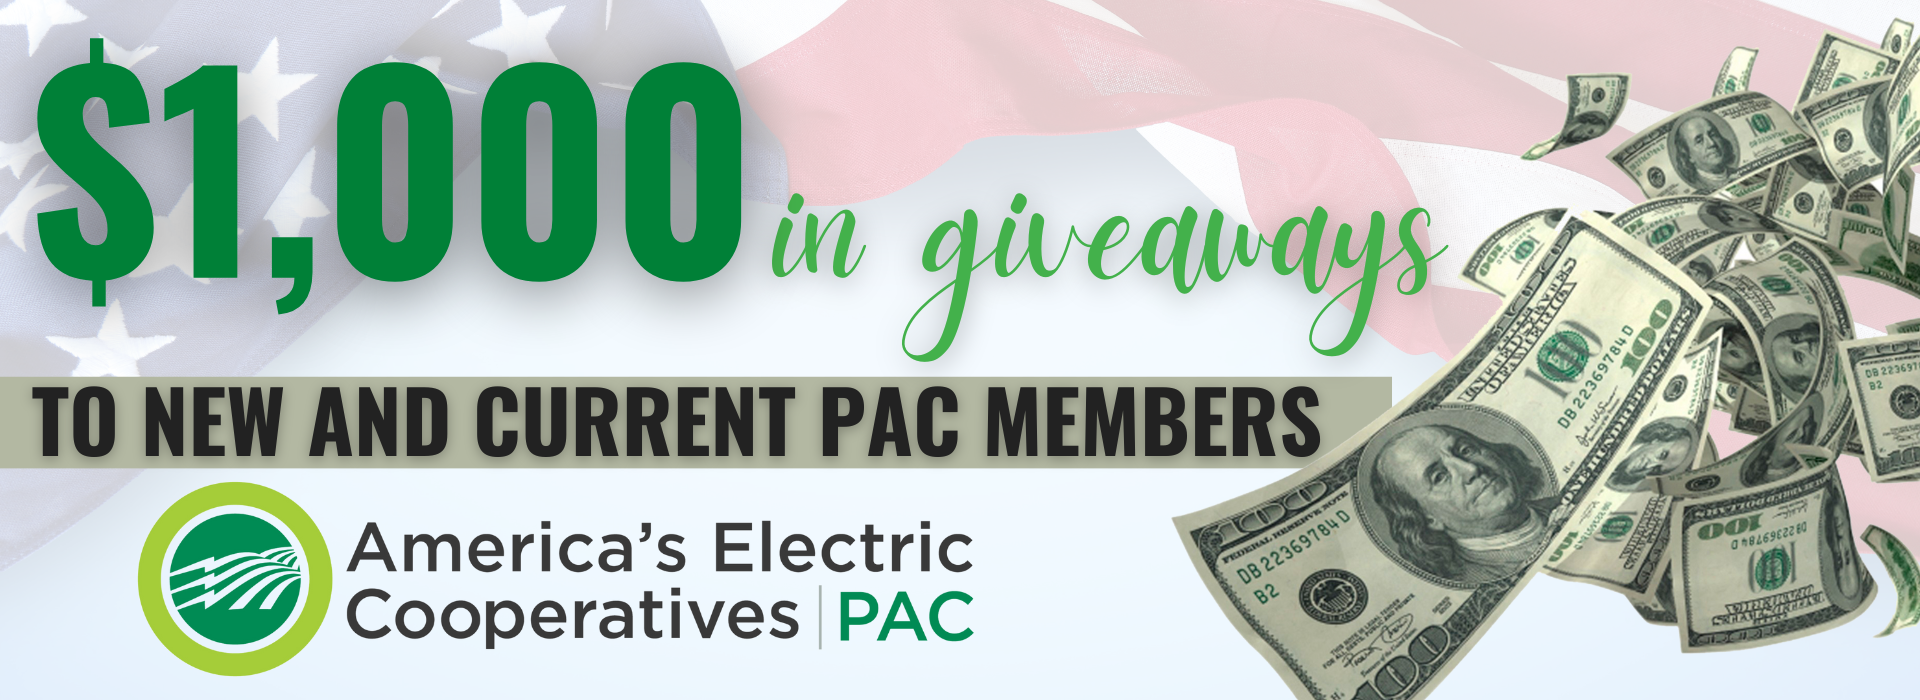 $1,000 in giveaways! Sign-up by Nov. 30, 2023, for your chance to win. One $500 drawing and two $250 drawings. For both current members already enrolled and new signups.